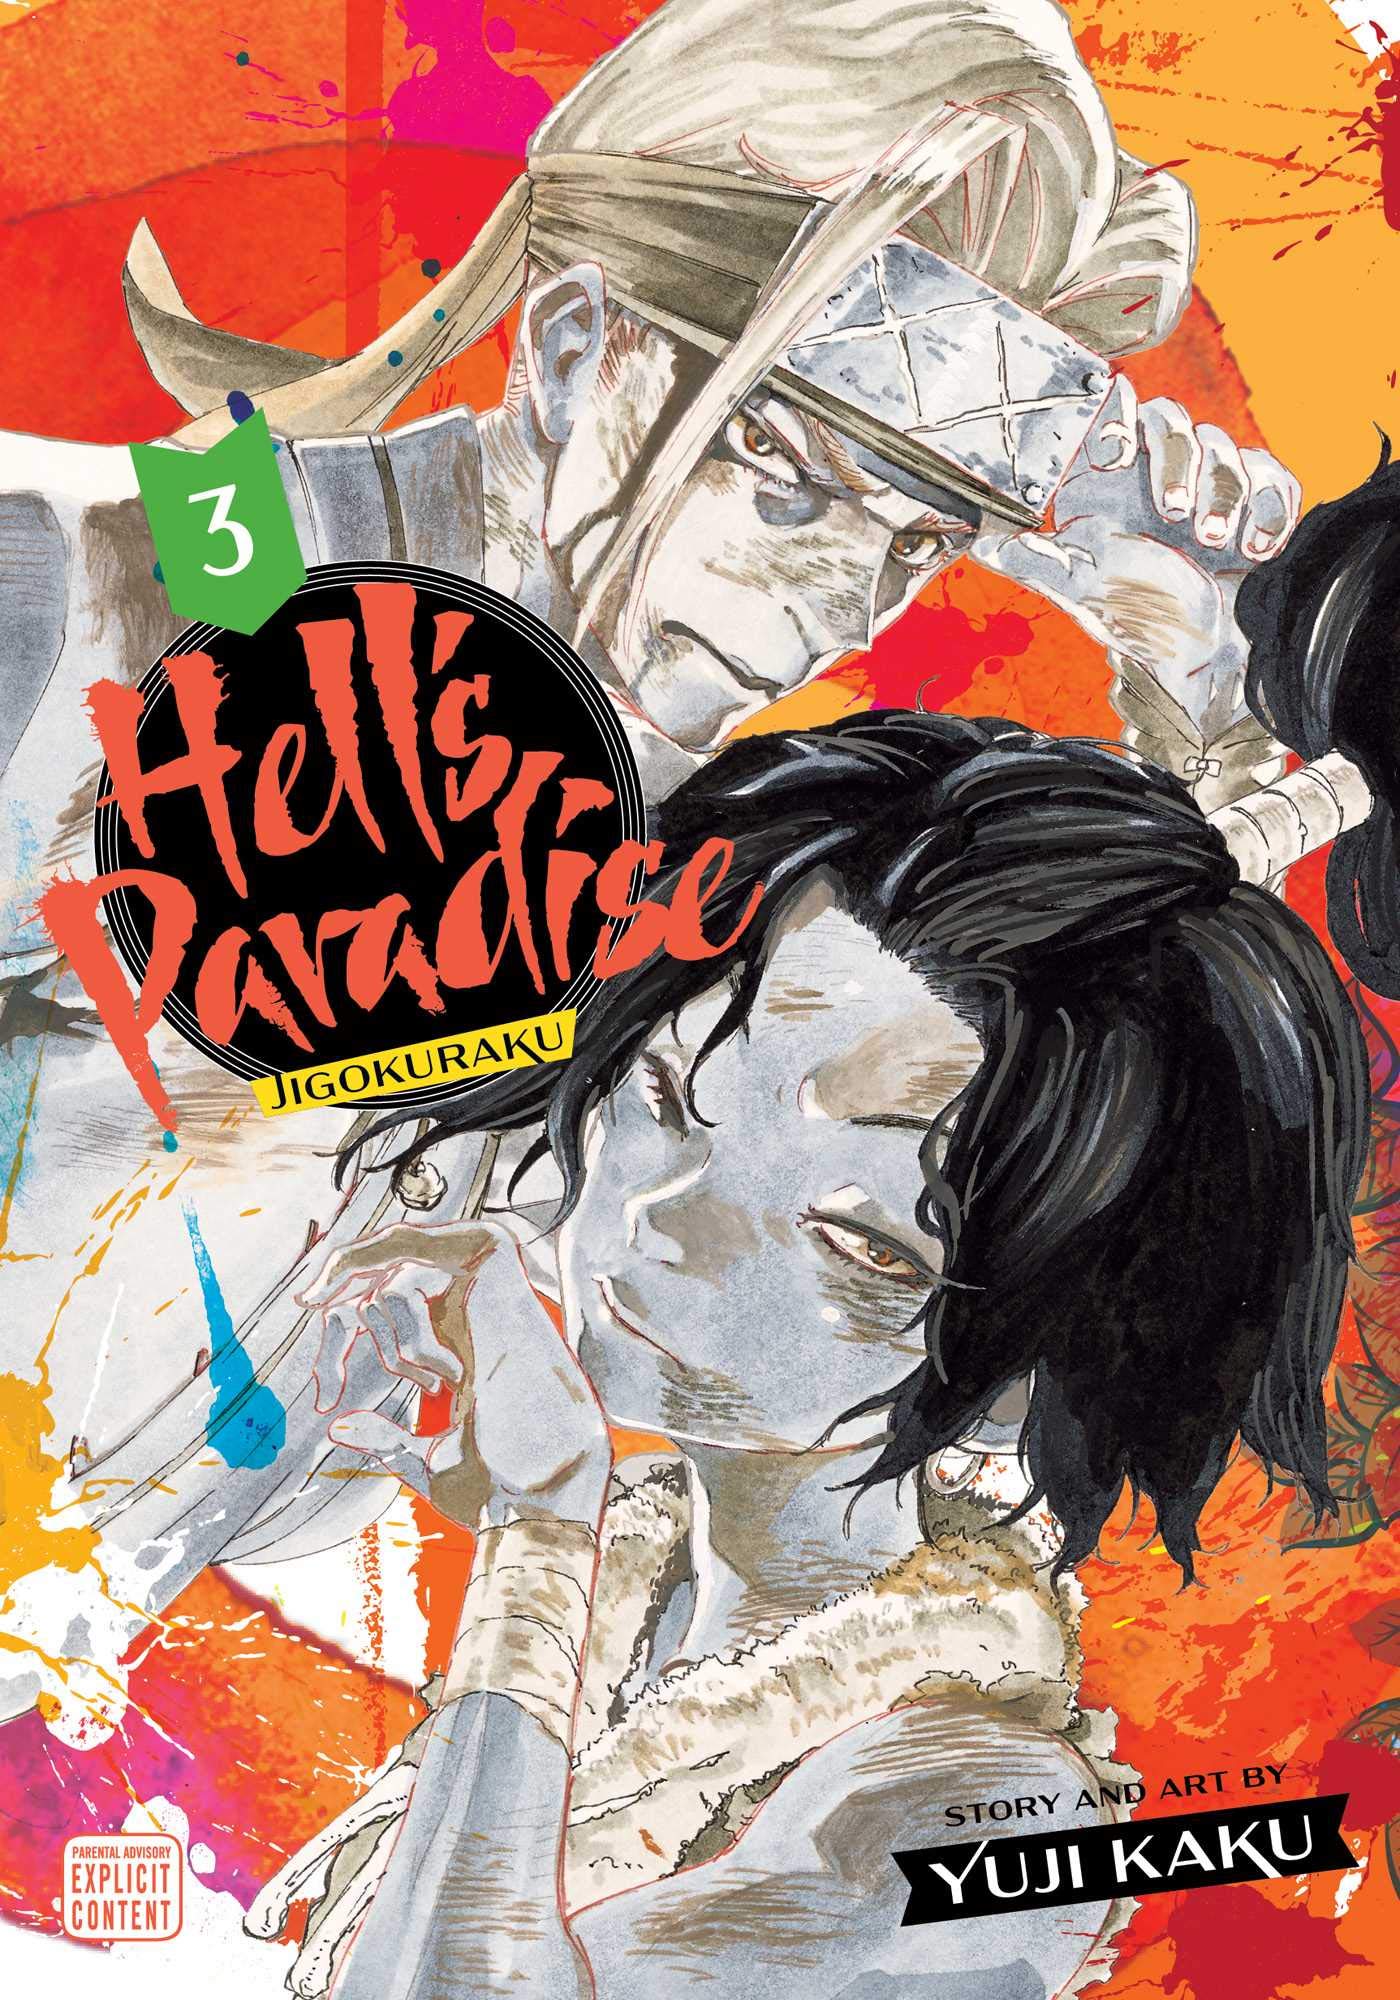 Why Hell's Paradise manga has the perfect ending? - Dexerto